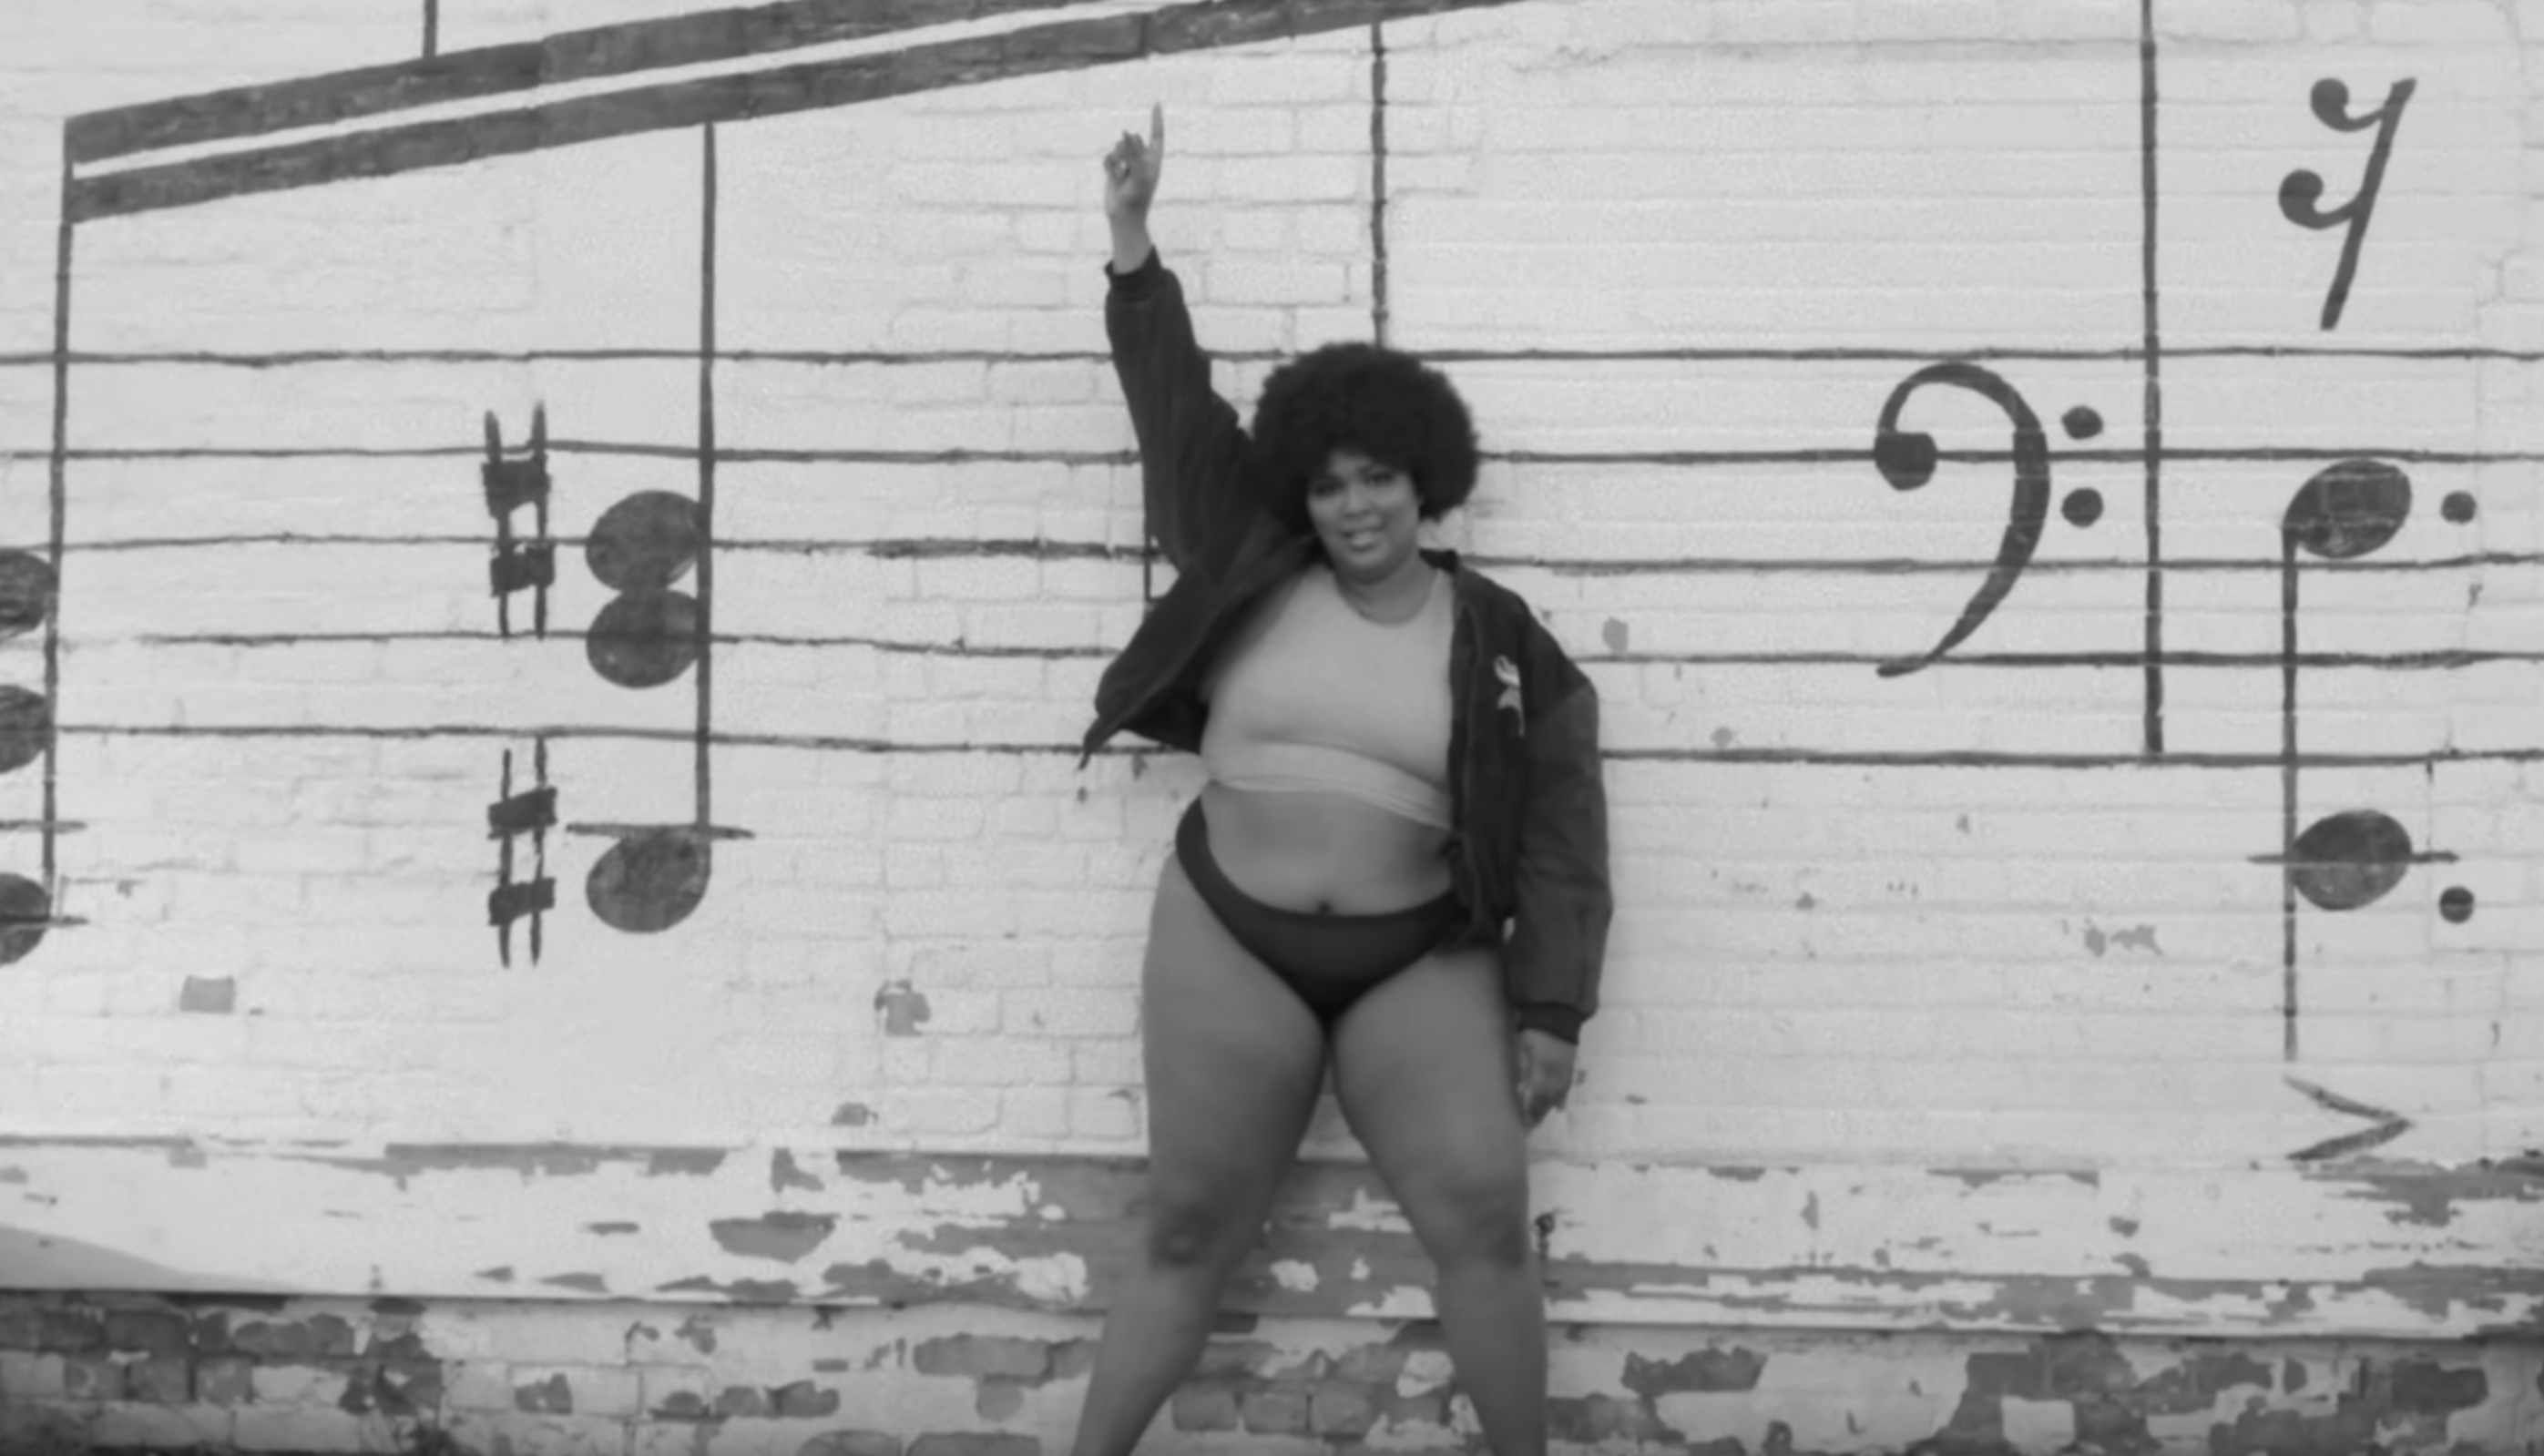 Greyscale photo of a woman (Lizzo) striking a magnificent pose in front of a brick wall with musical notation painted on it